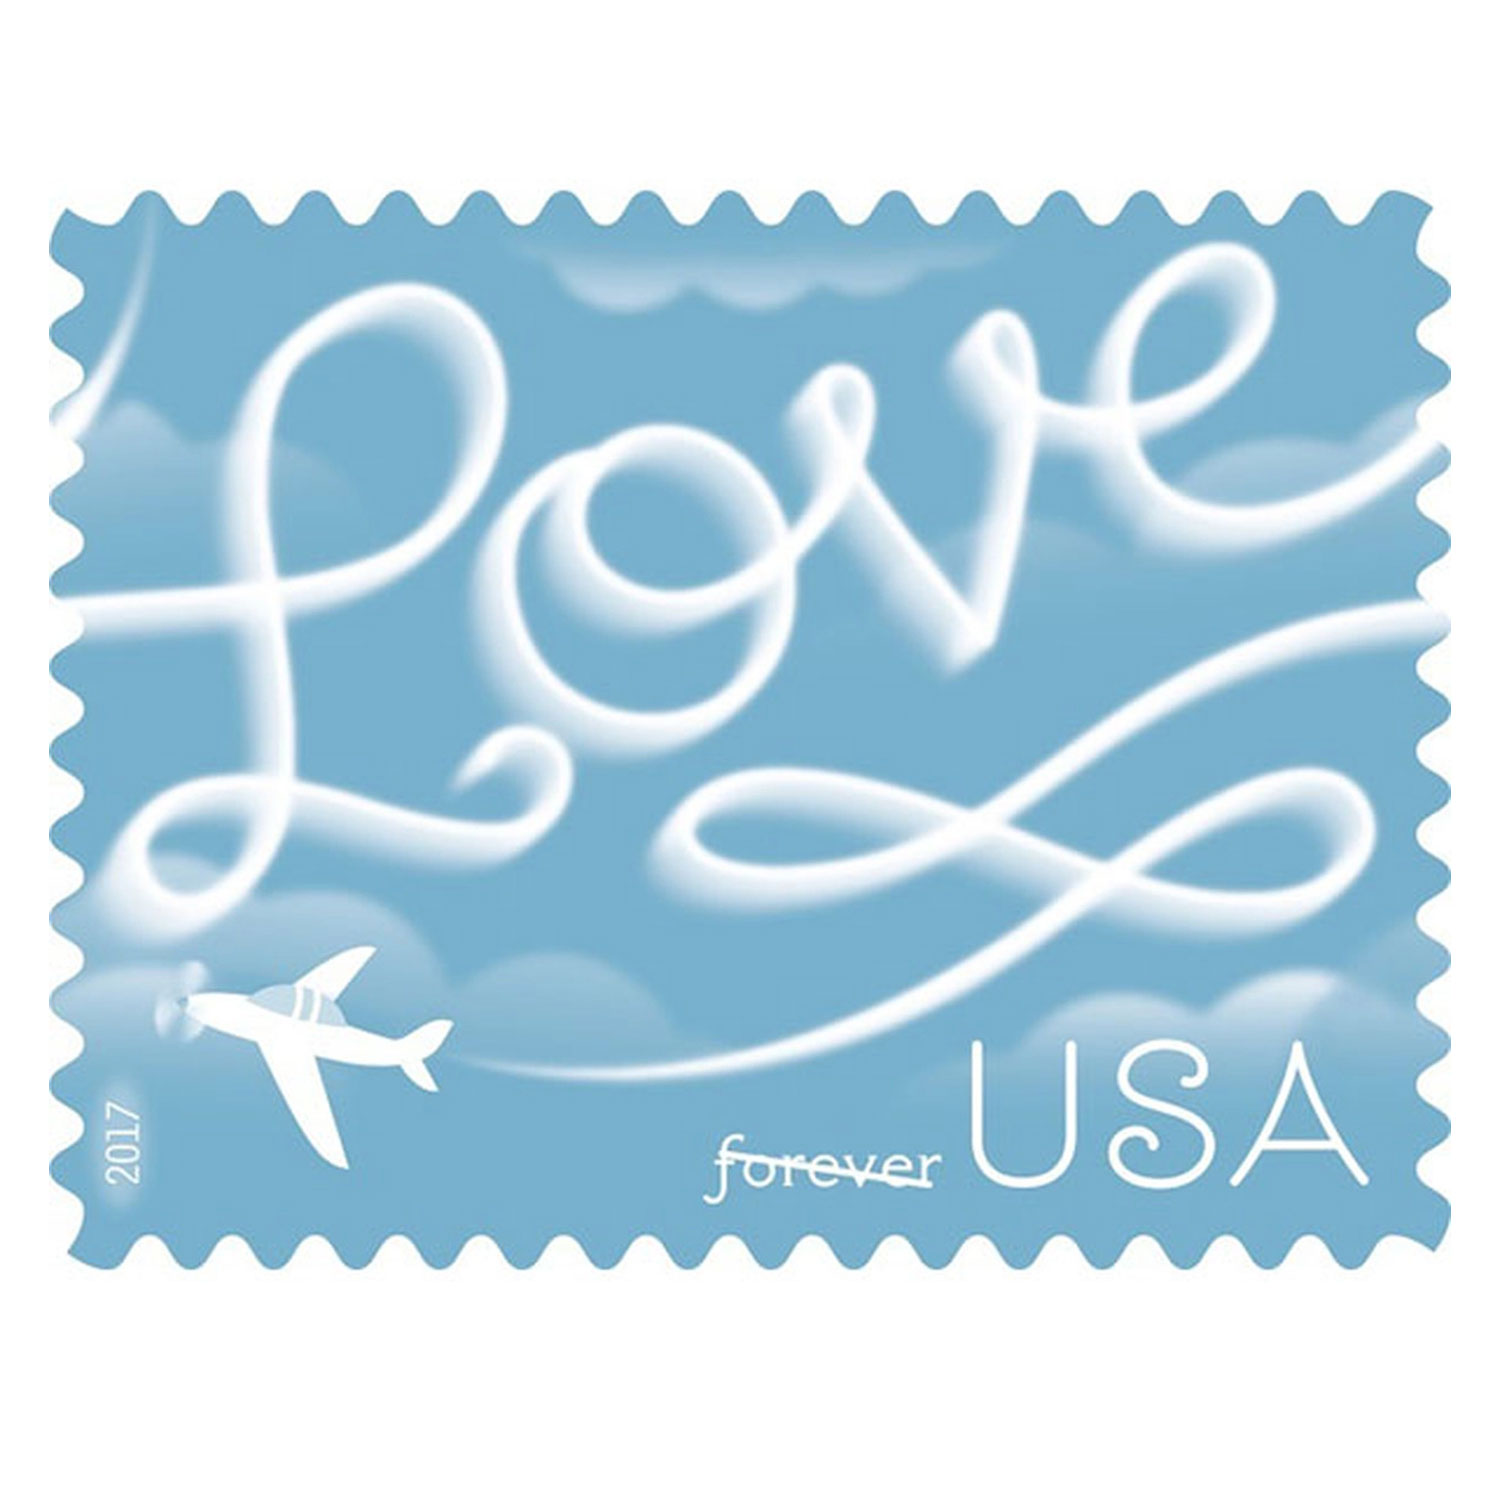 USPS® Forever Stamps For First Class Mail (100-Pack)